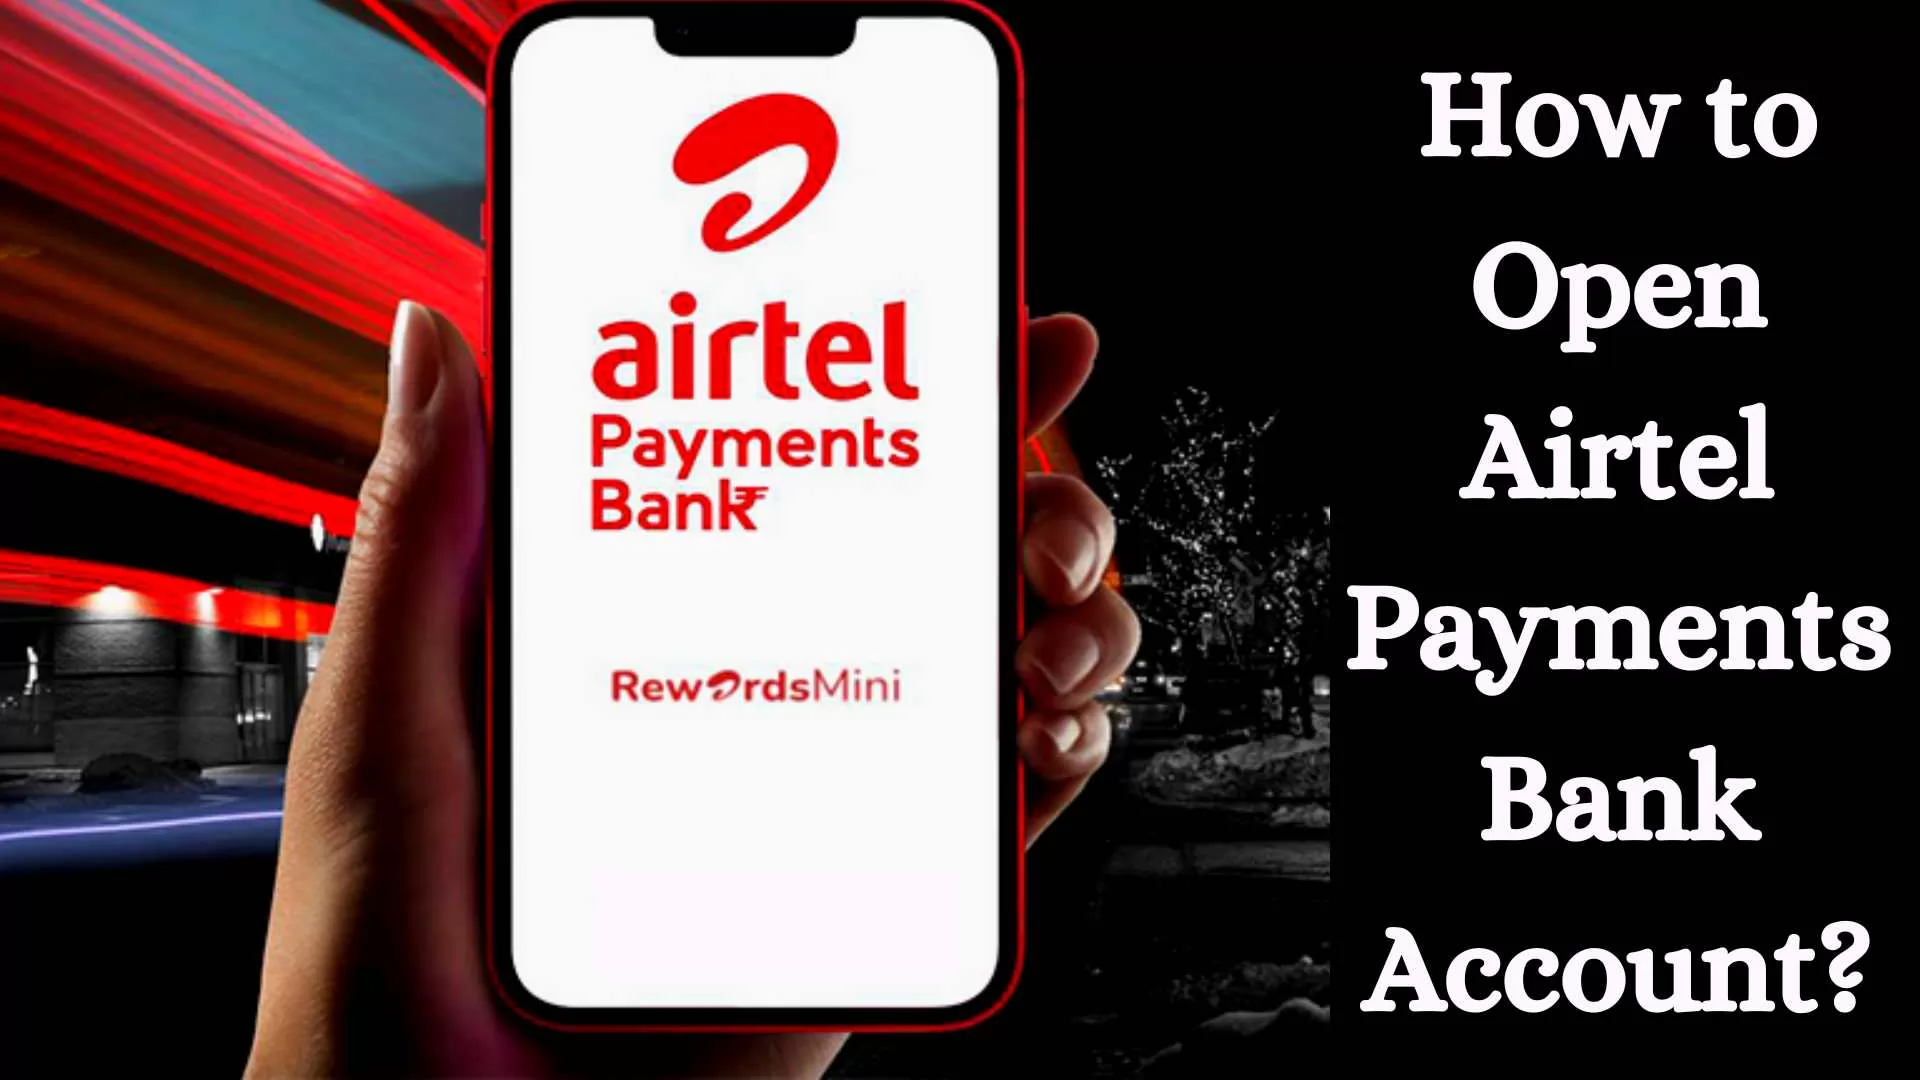 How to Open Airtel Payments Bank Account?